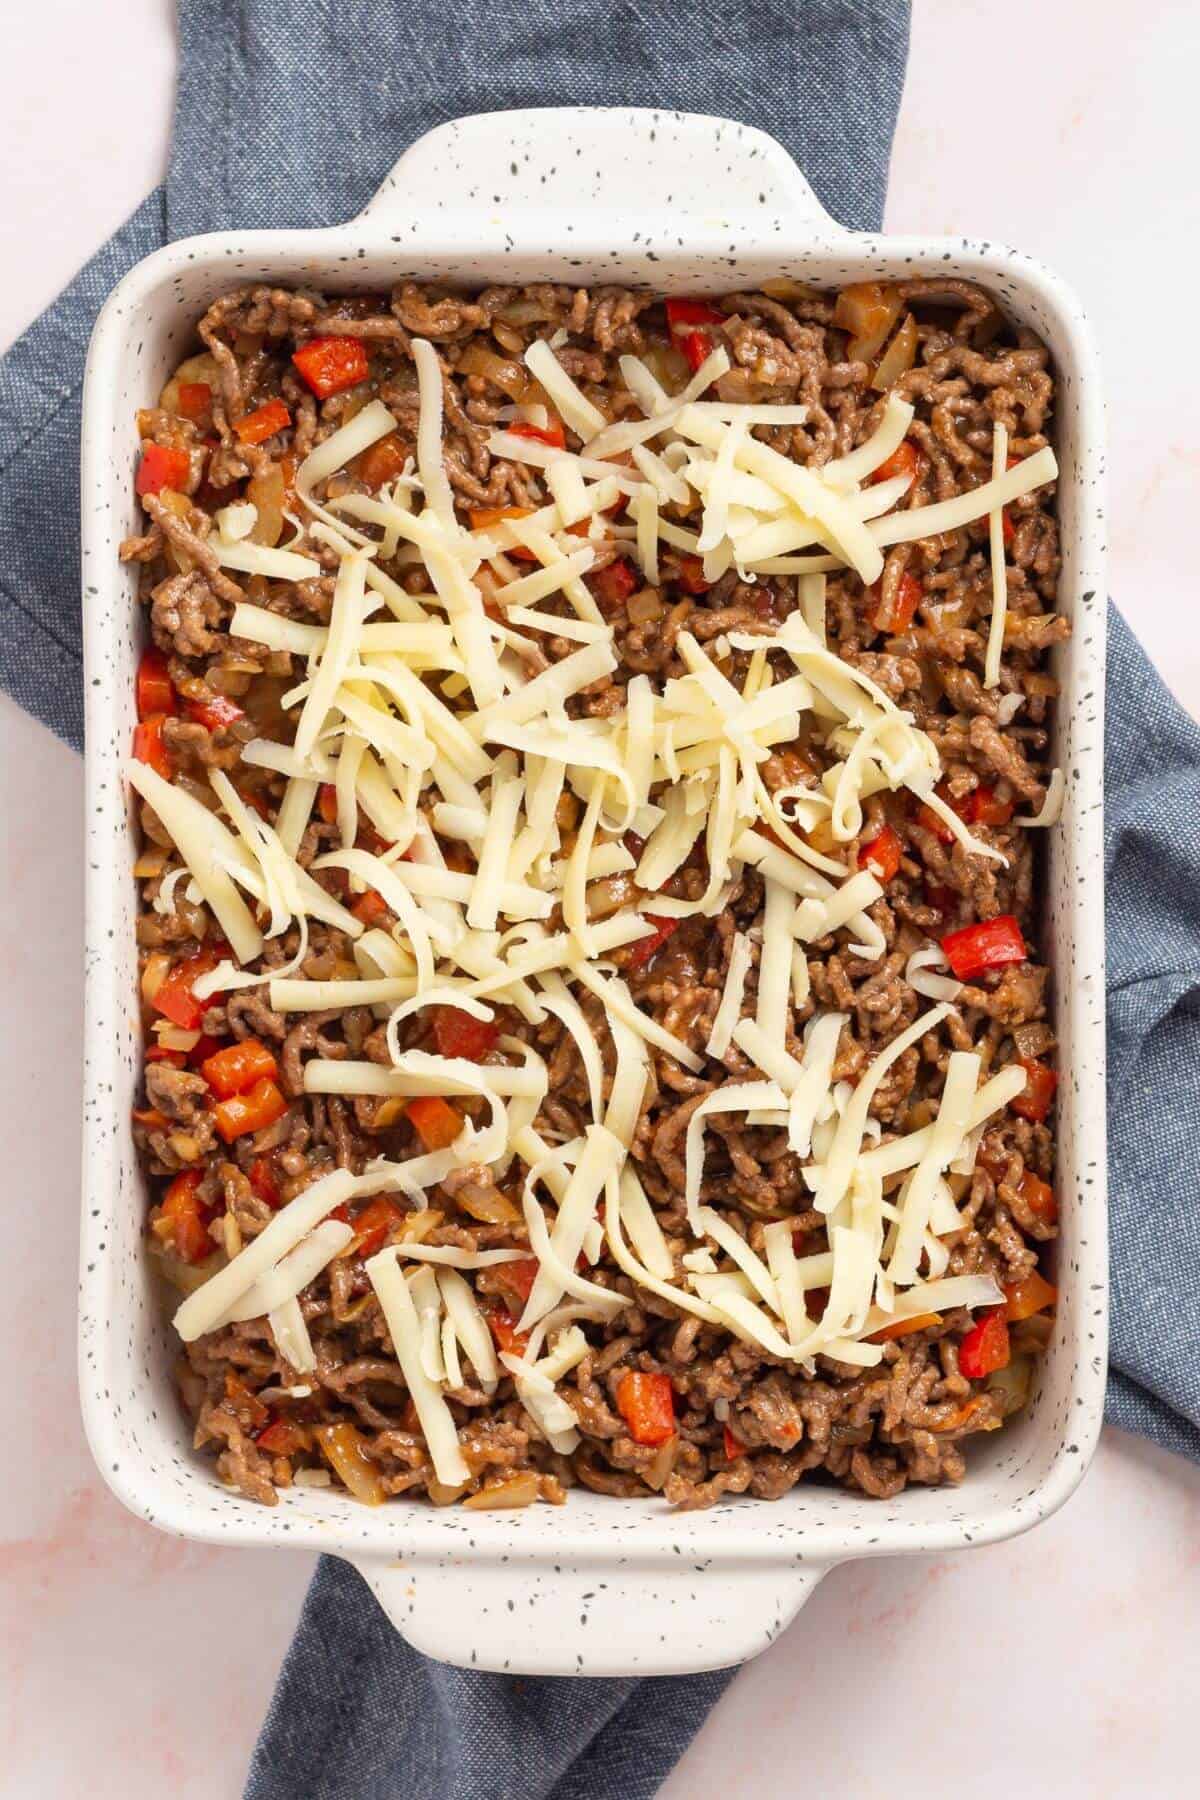 Ground beef mixture and cheese layer.